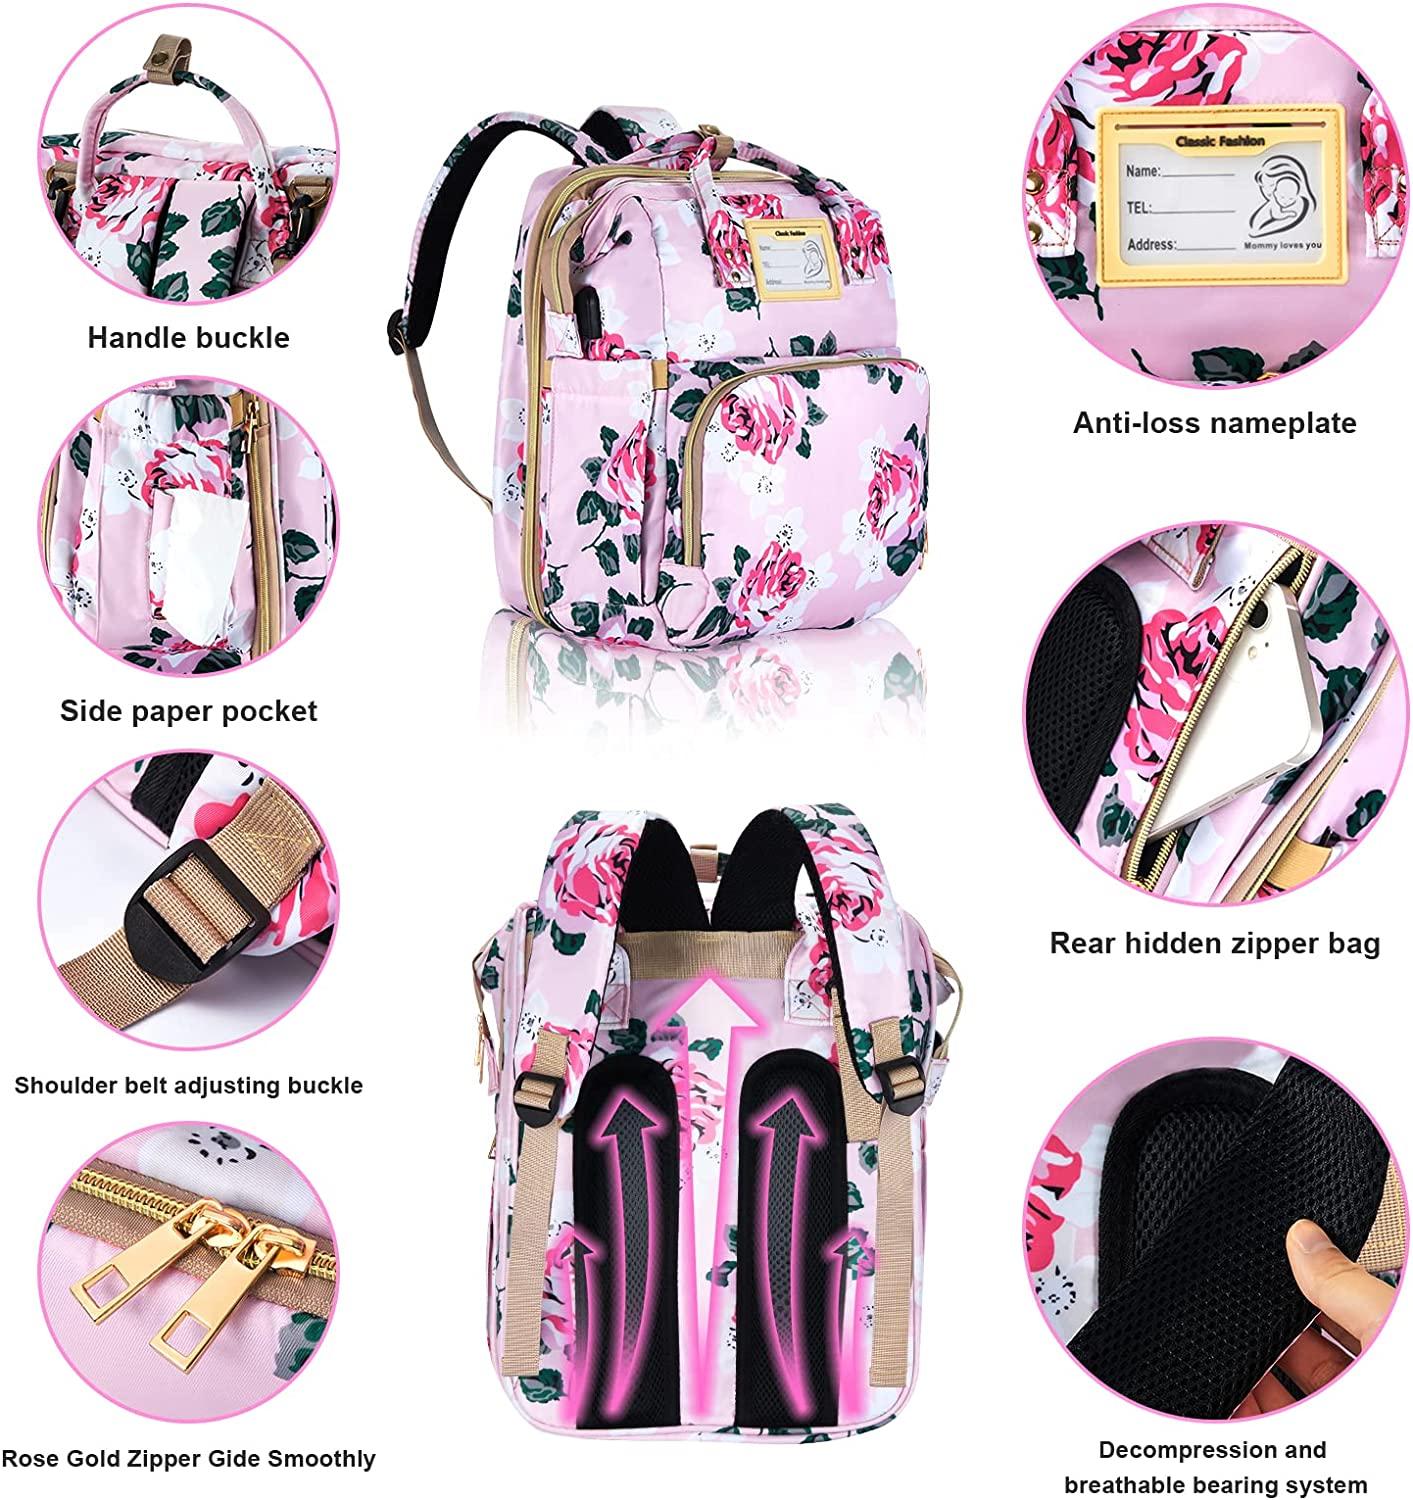 Girls' Diaper Bags: Cute Baby Bags For Changing Your Little Girl On the Go